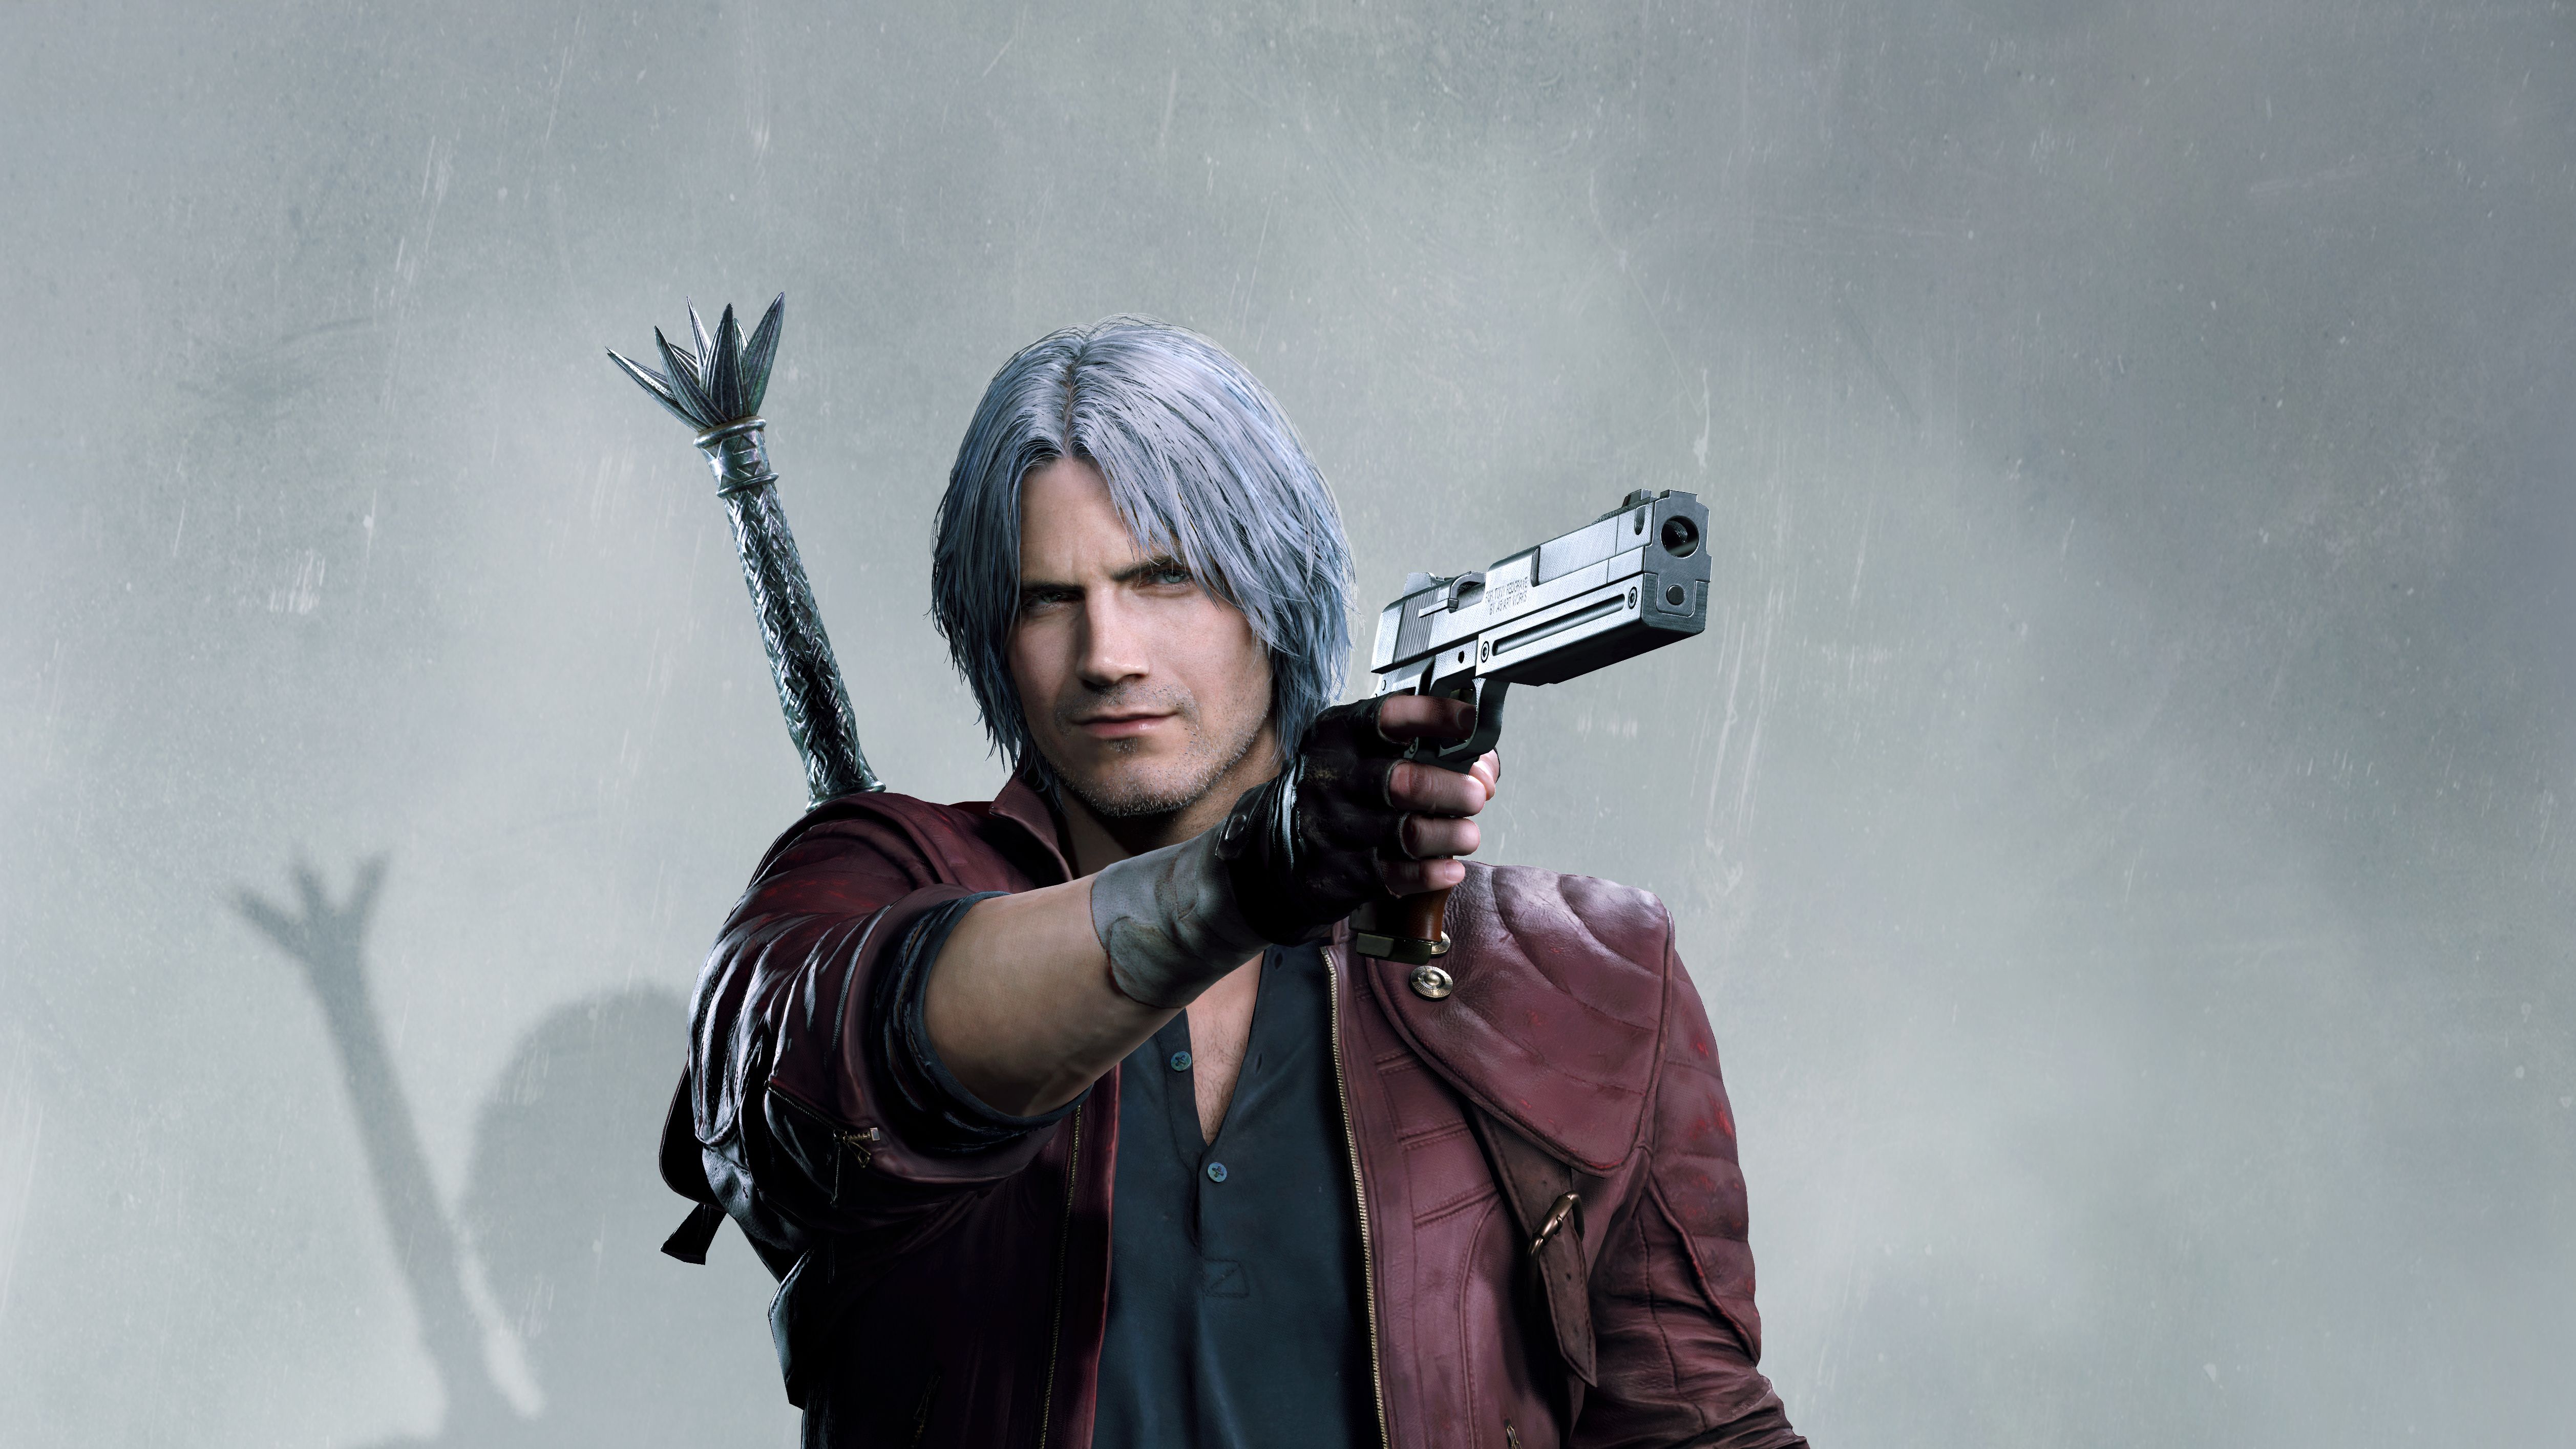 Dante Devil May Cry 5 4k, HD Games, 4k Wallpapers, Images, Backgrounds,  Photos and Pictures